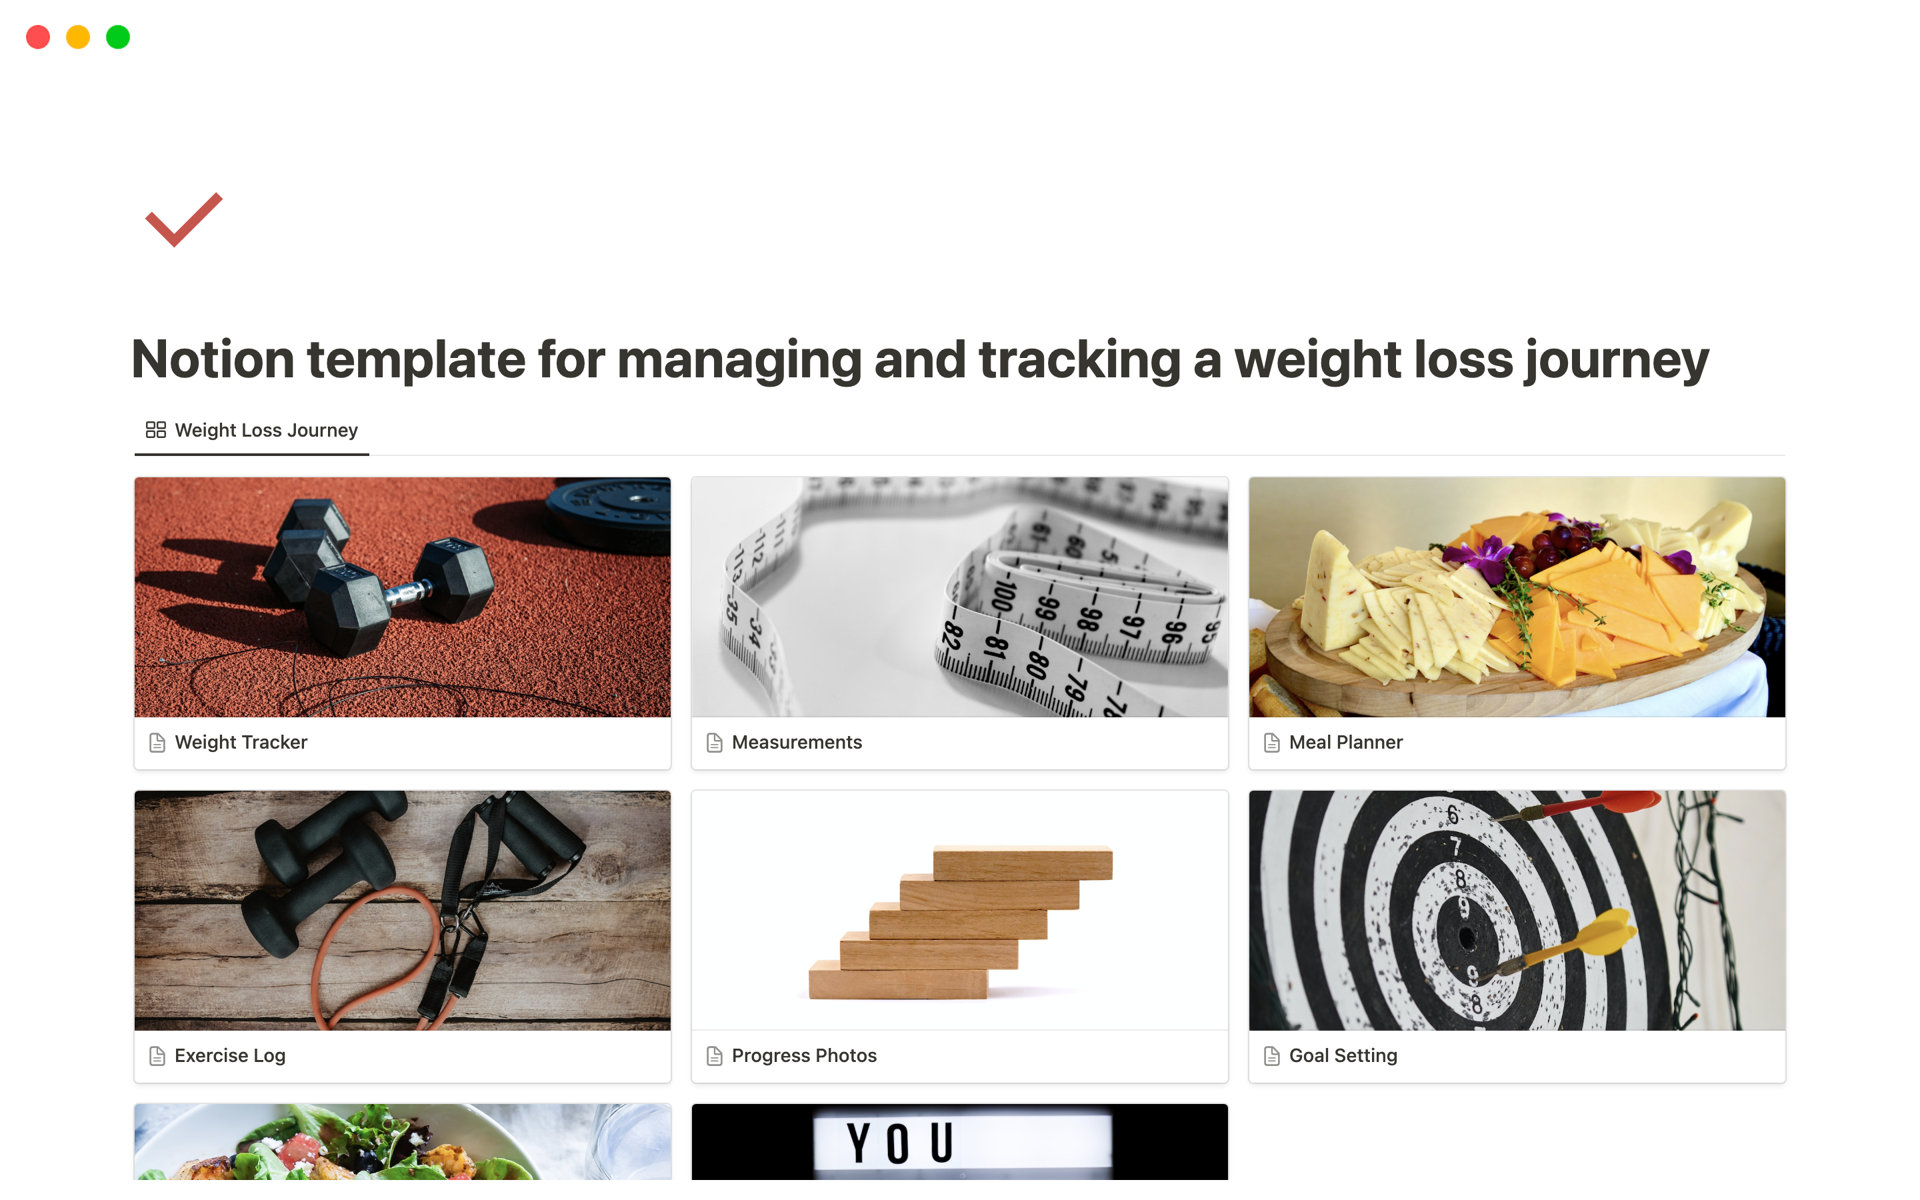 Achieve your weight loss goals effectively with our Notion template designed to streamline and track your progress.